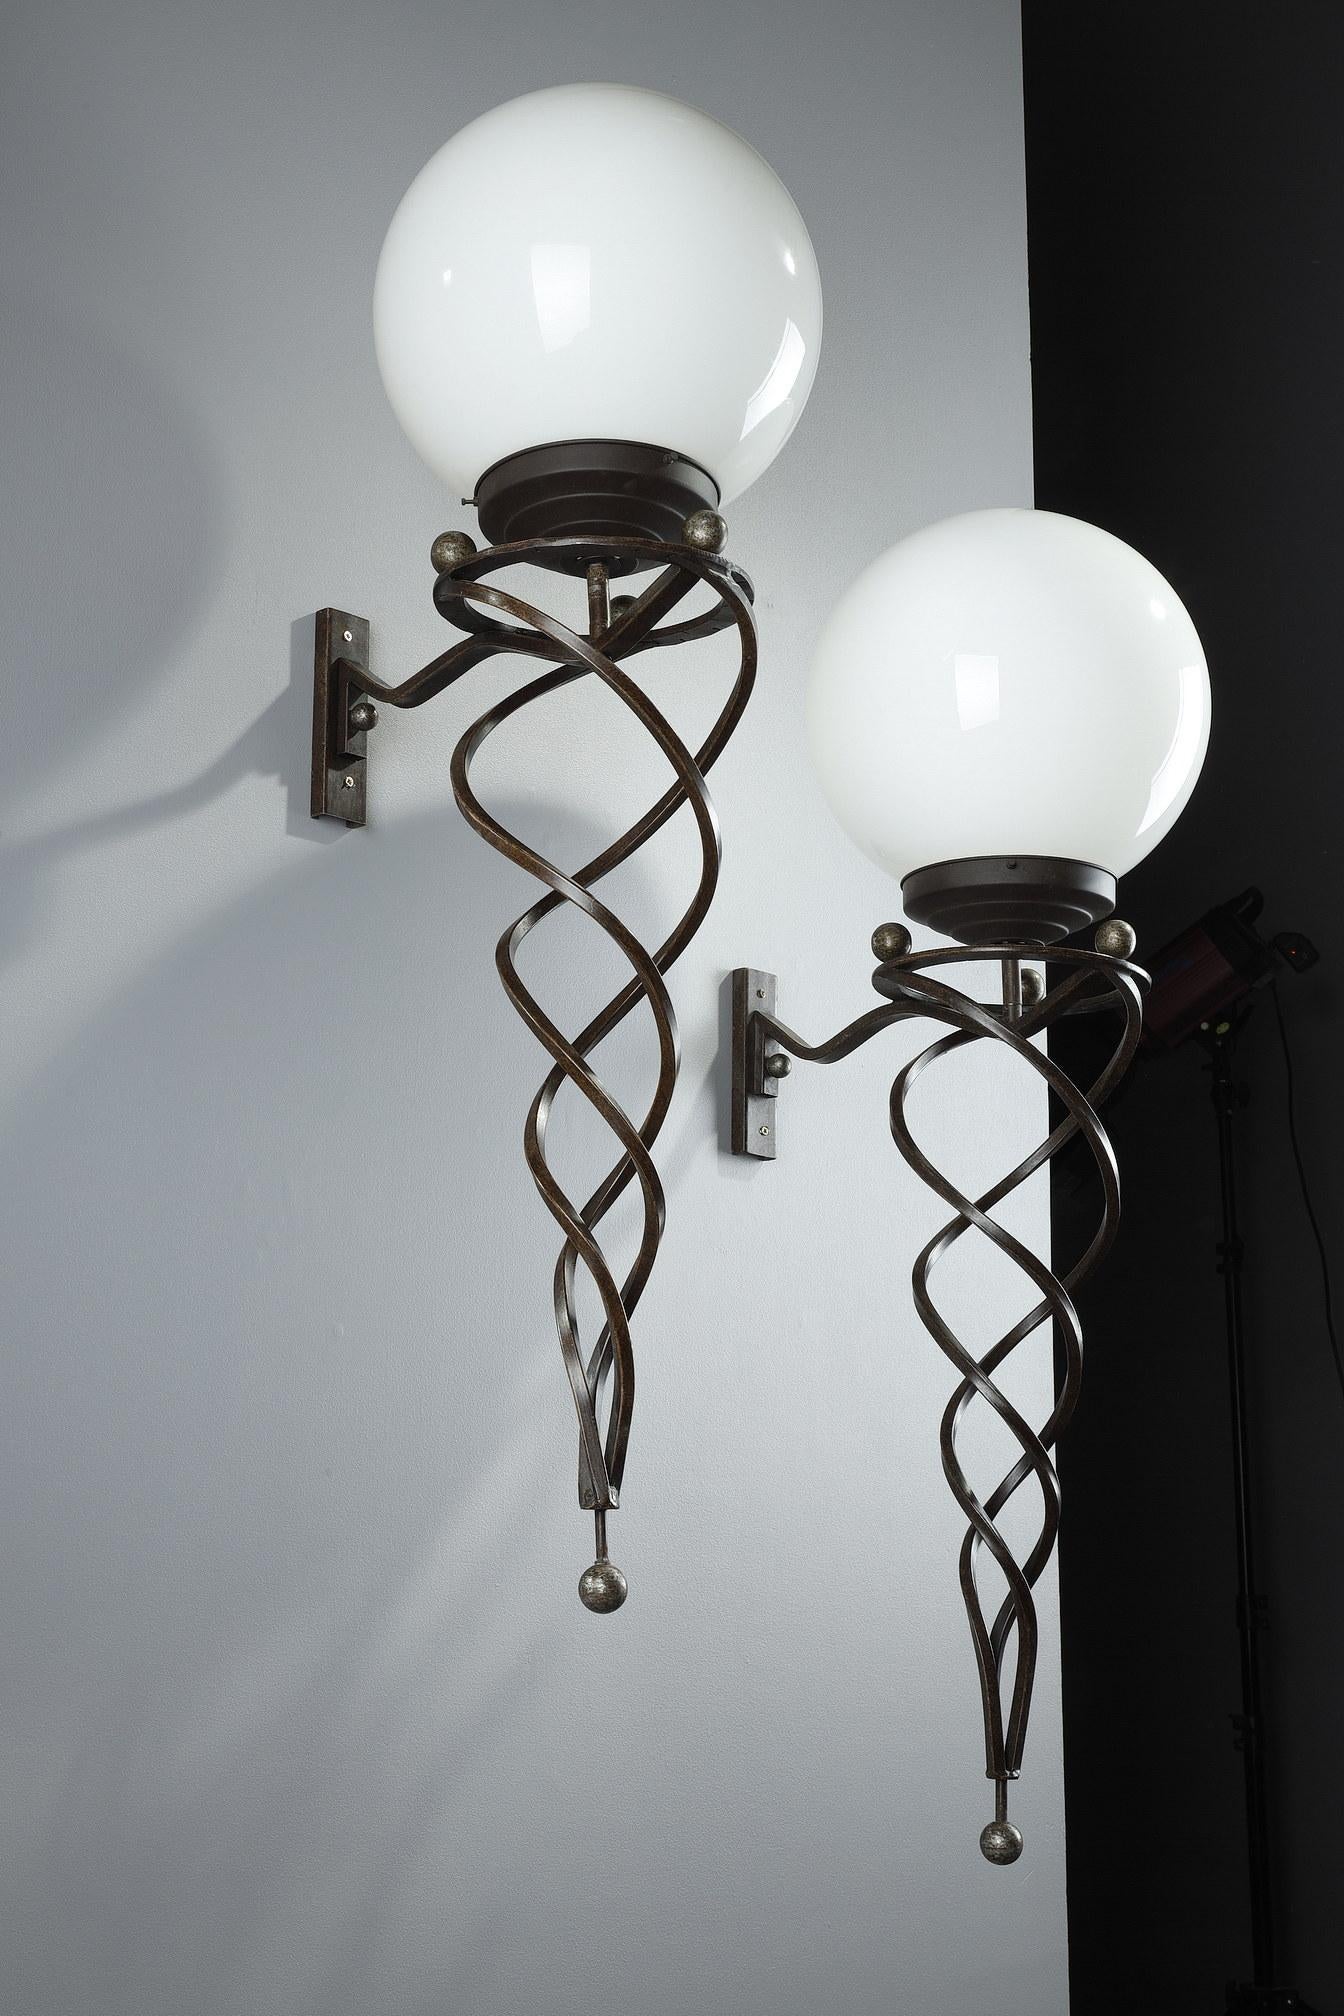 Pair of wrought iron sconces in the Art Deco style from the late 20th century. Each light fixture is composed of a shaft in twisted swirling rods giving movement and lightness to the whole. The wrought iron structure raises a spherical shade in